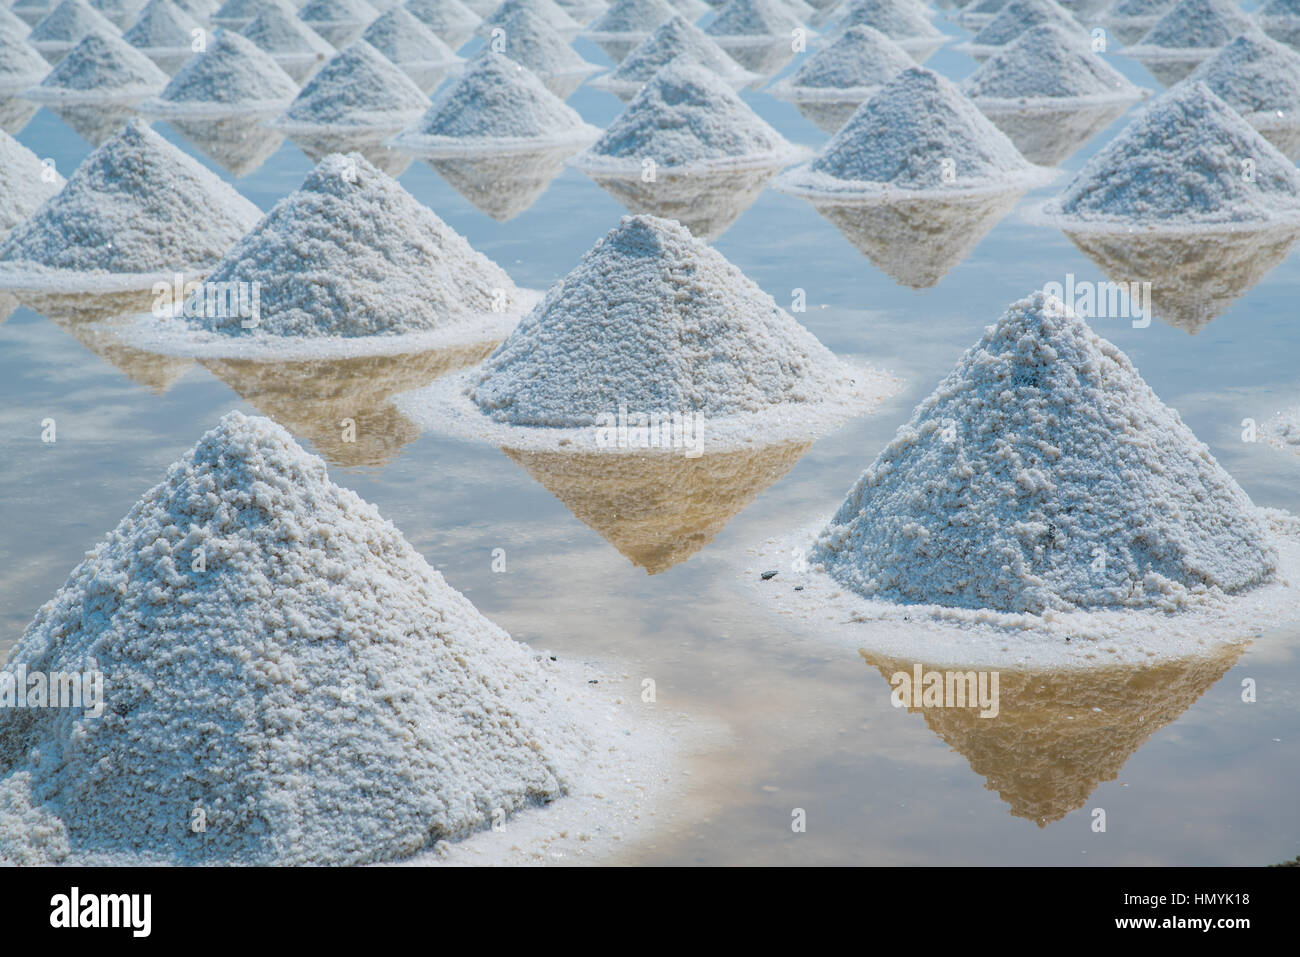 Heap of sea salt in original salt produce farm make from natural ocean salty water preparing for last process before sent it to industry consumer Stock Photo